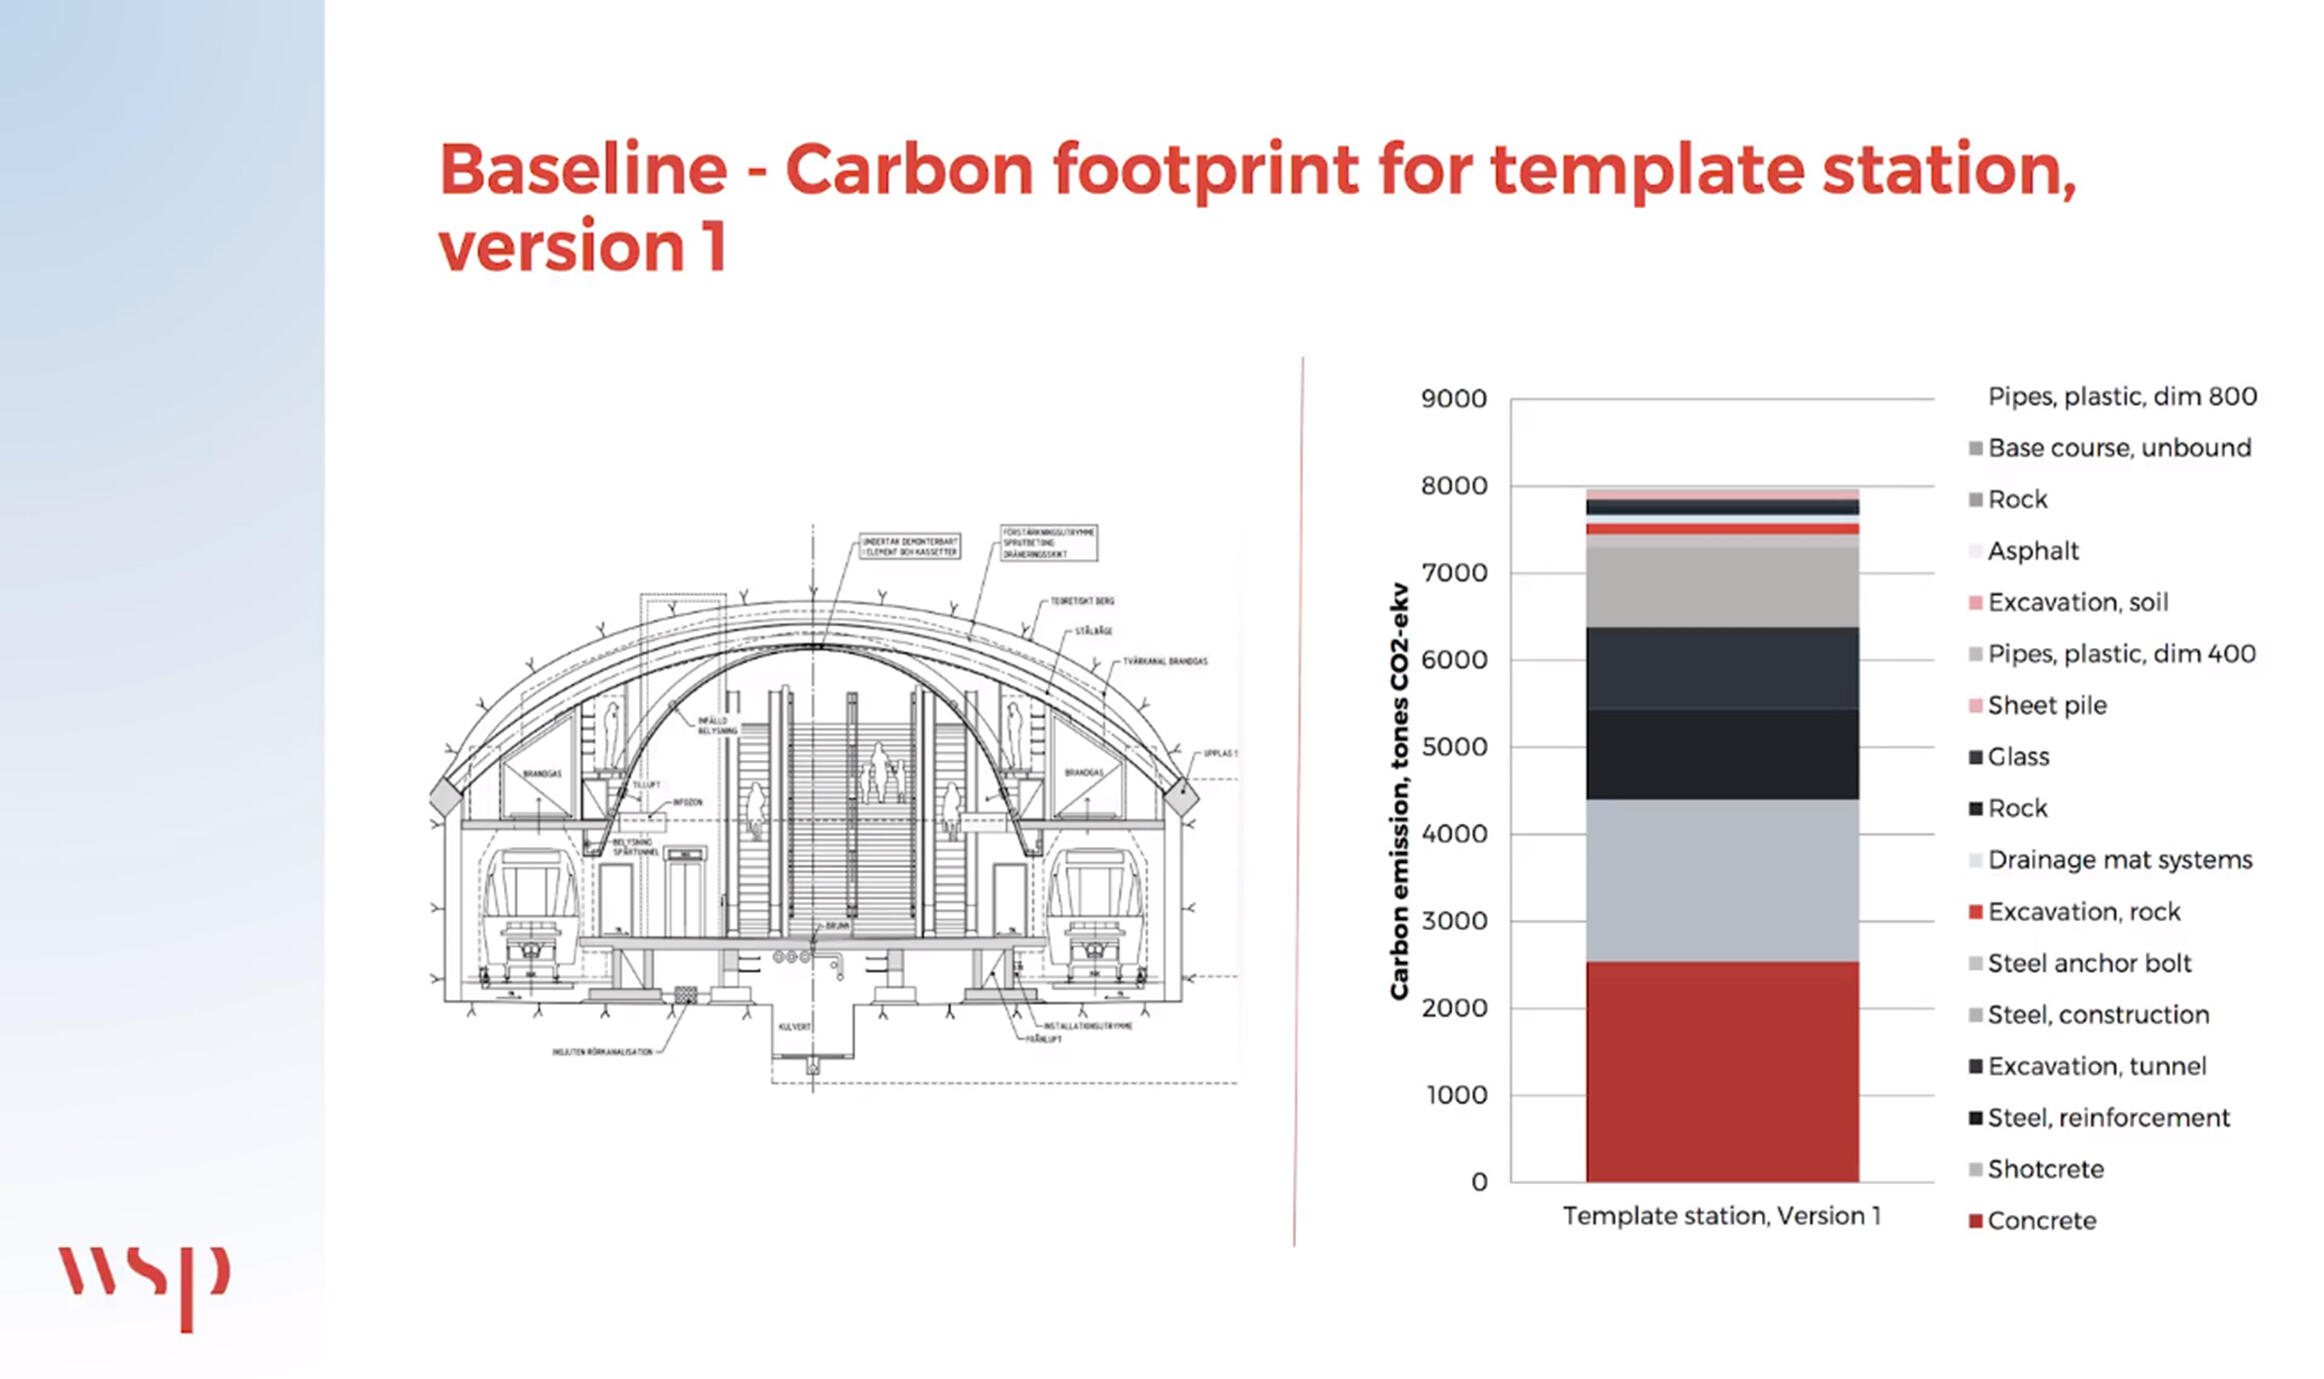 Carbon footprint for template station- version 1